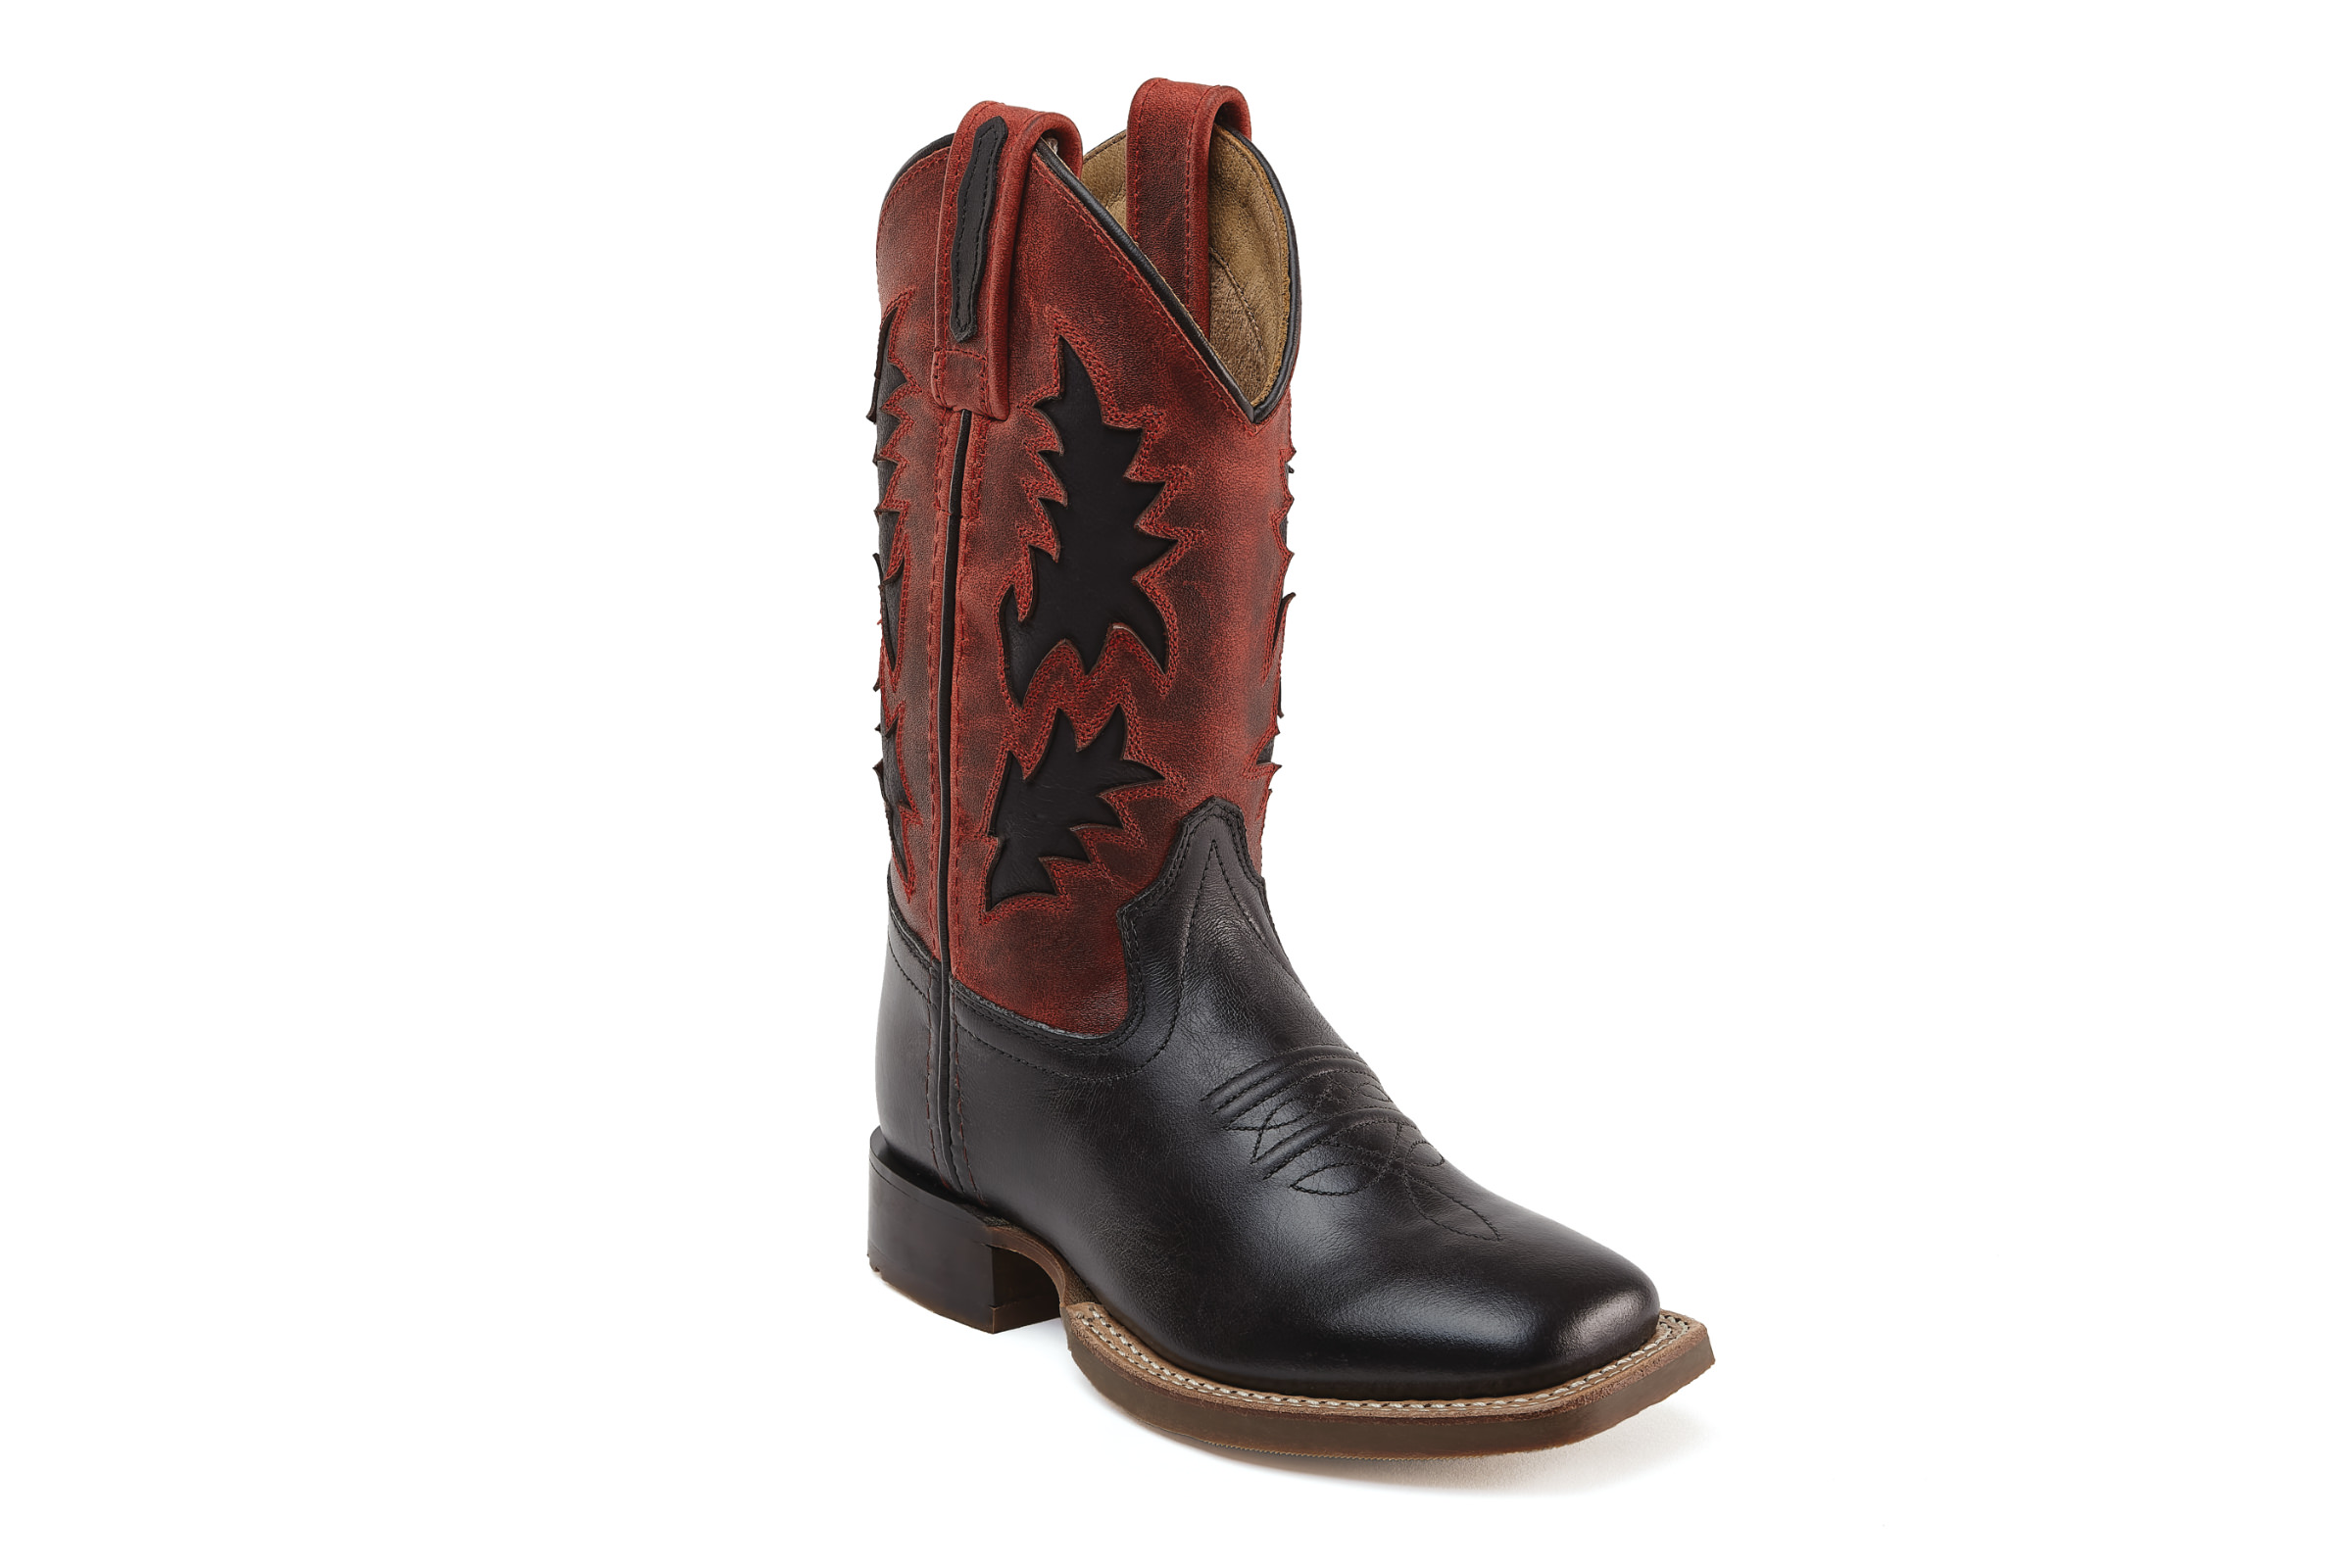 Western boots for children "Fort Smith", black/red